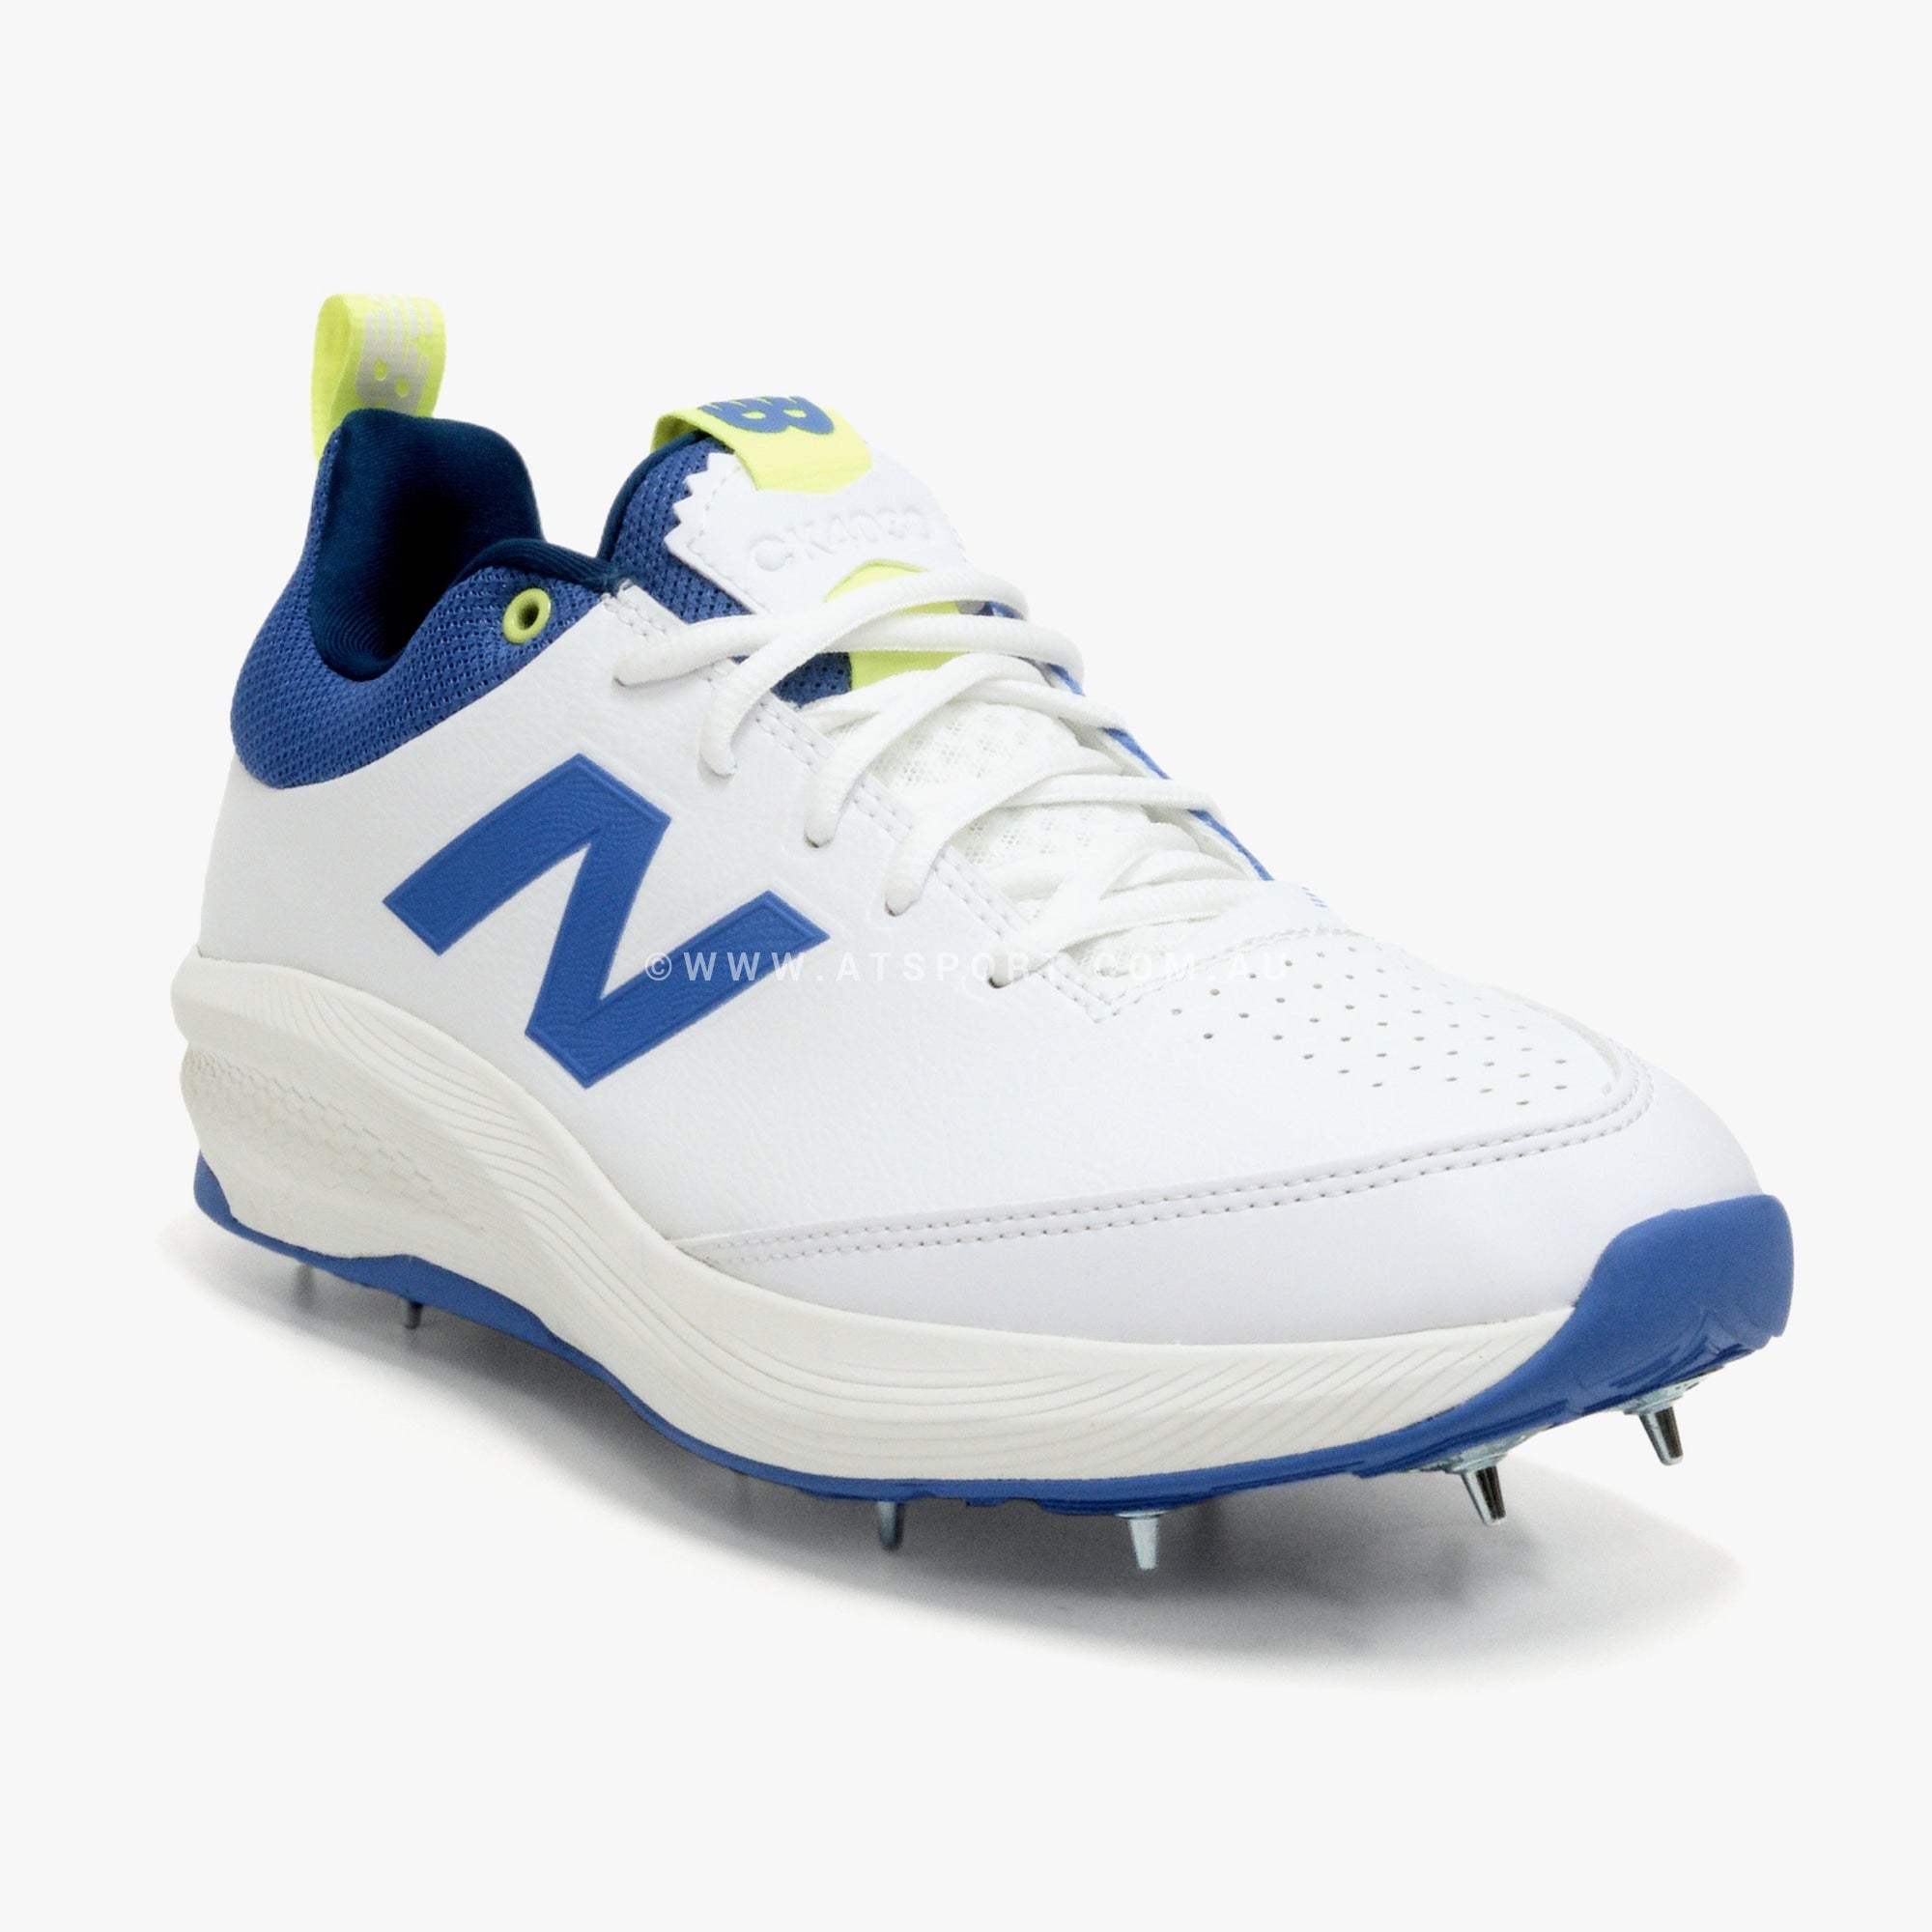 New Balance Ck4030 V5 Spike Cricket Shoes / Spikes All-Rounder